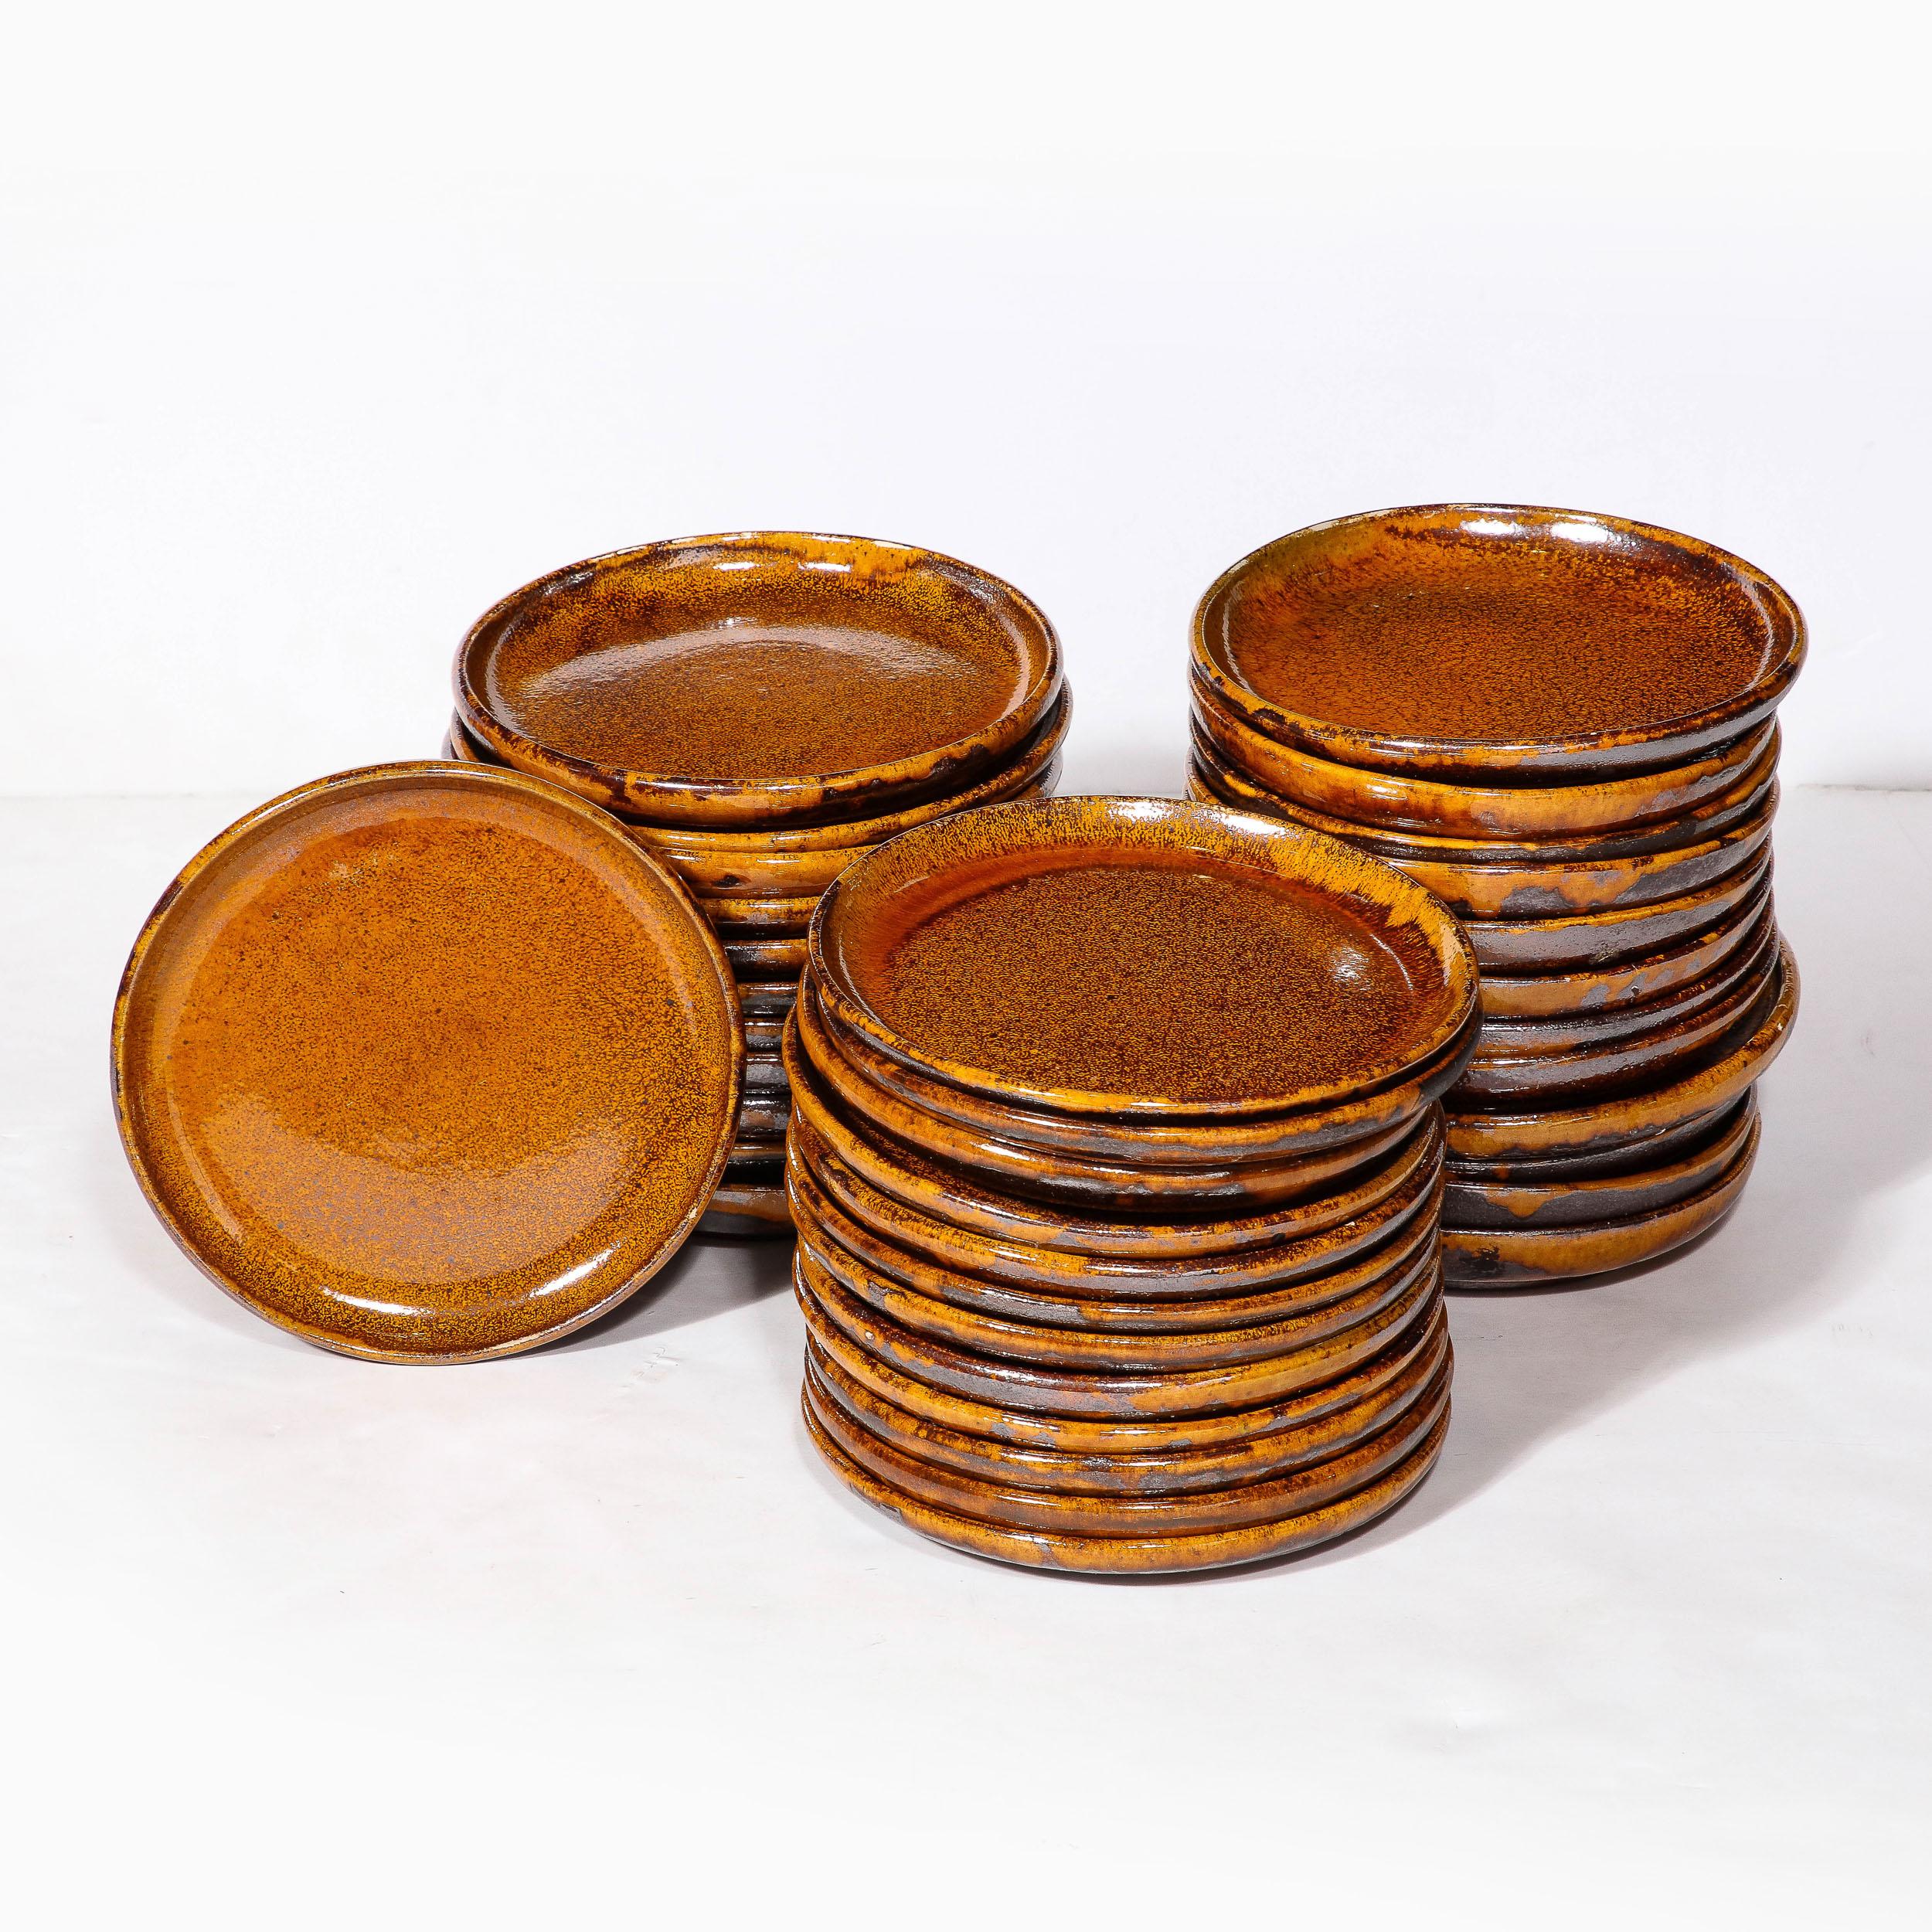 French Mid-Century Modernist Ceramic Serveware Set in Deep Yellow Ocre by Vieux Biot  For Sale